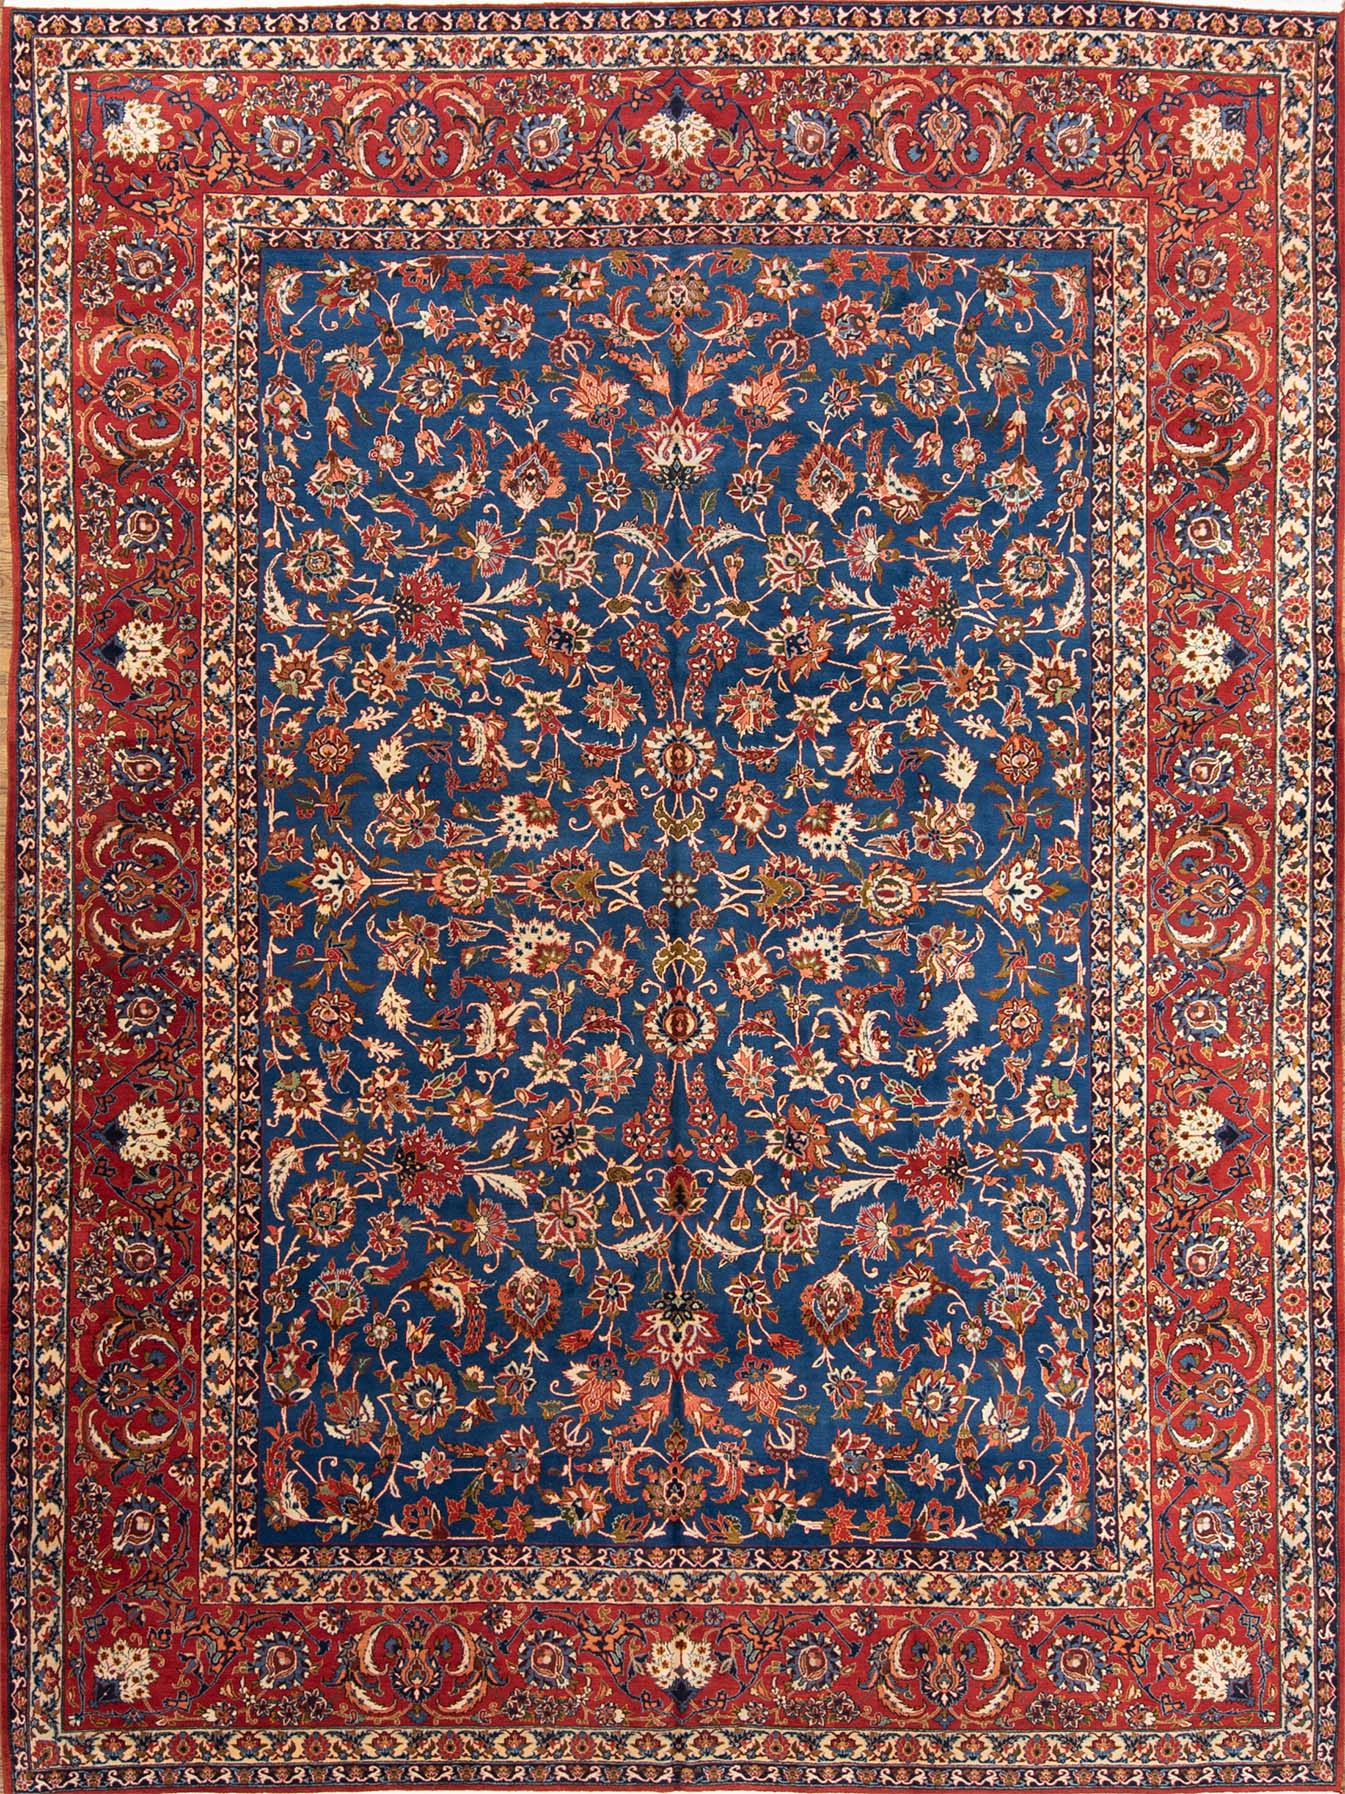 Vintage Persian Isfahan rug. Handmade wool Persian Isfahan rug, floral allover design in blue and terracotta color. Size 10x14.